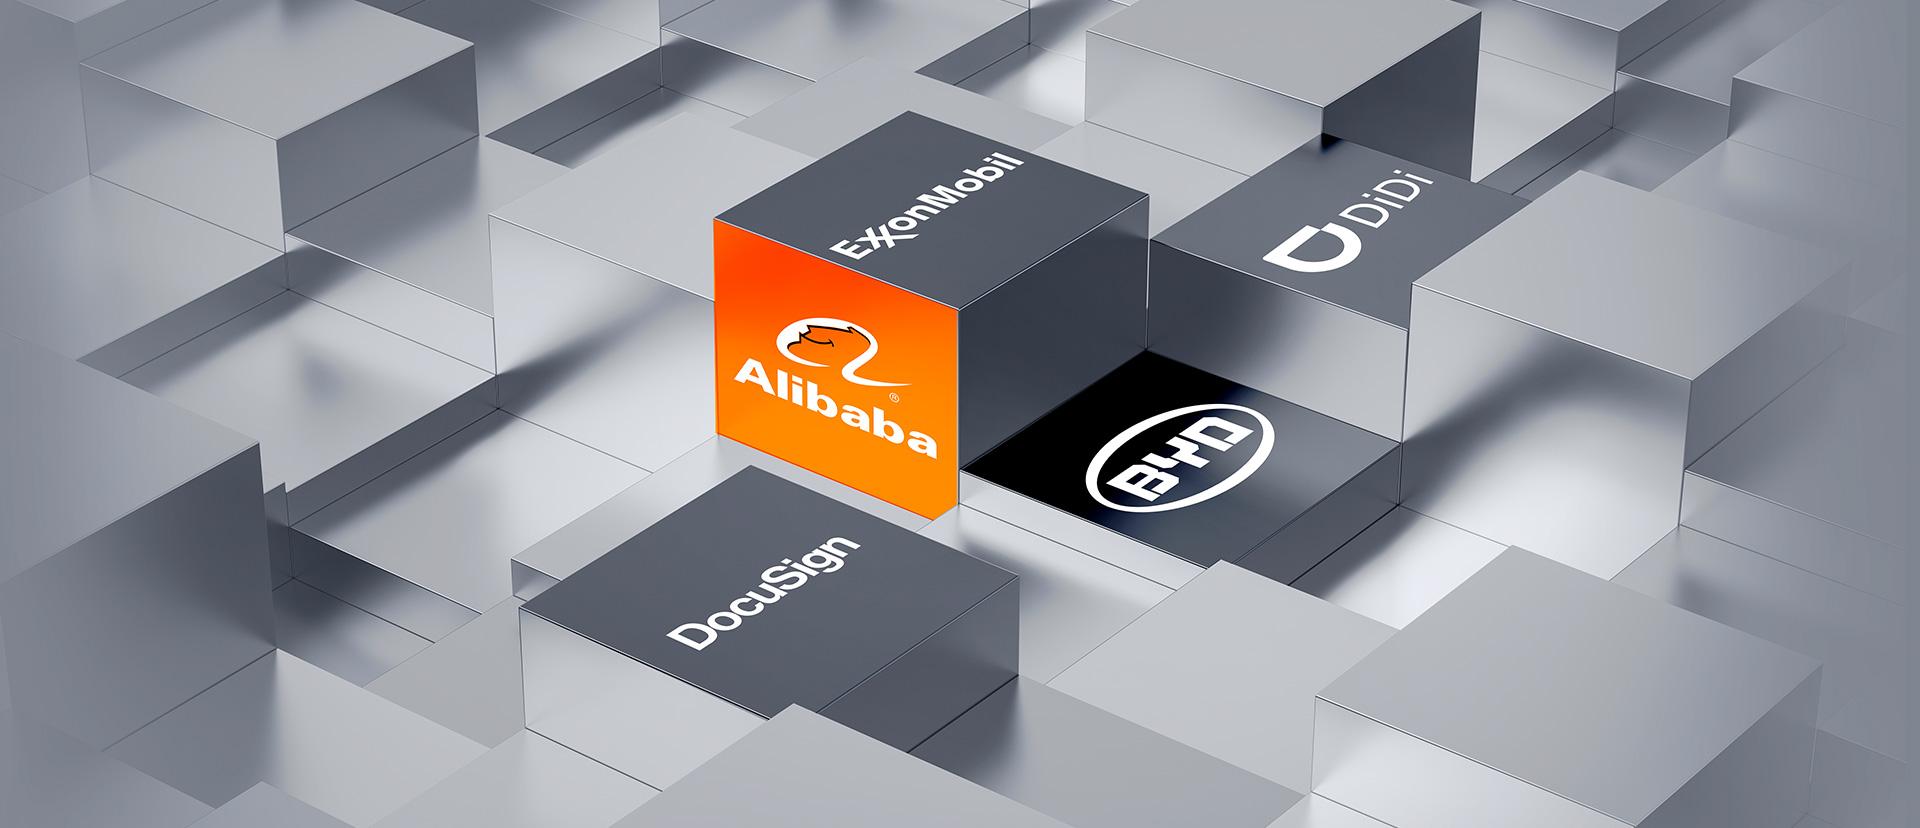 Alibaba, Didi, BYD, DocuSign, and Exxon Mobil: Weekly Digest (6 – 10 June)